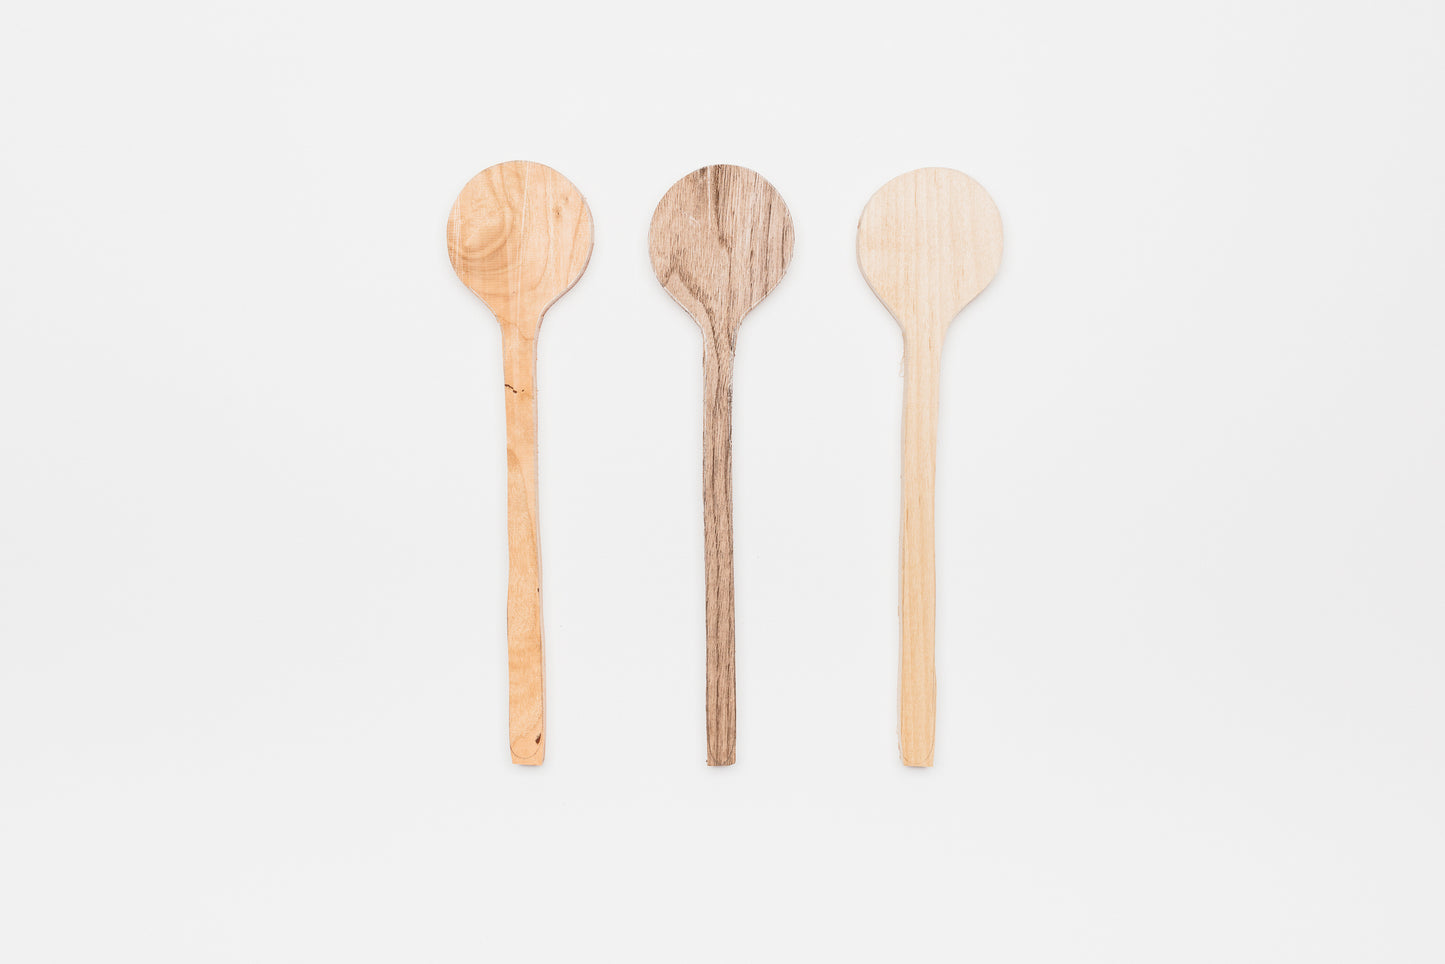 Large cooking spoon blanks. From left to right is Cherry, Walnut, and Alder | Melanie Abrantes Designs